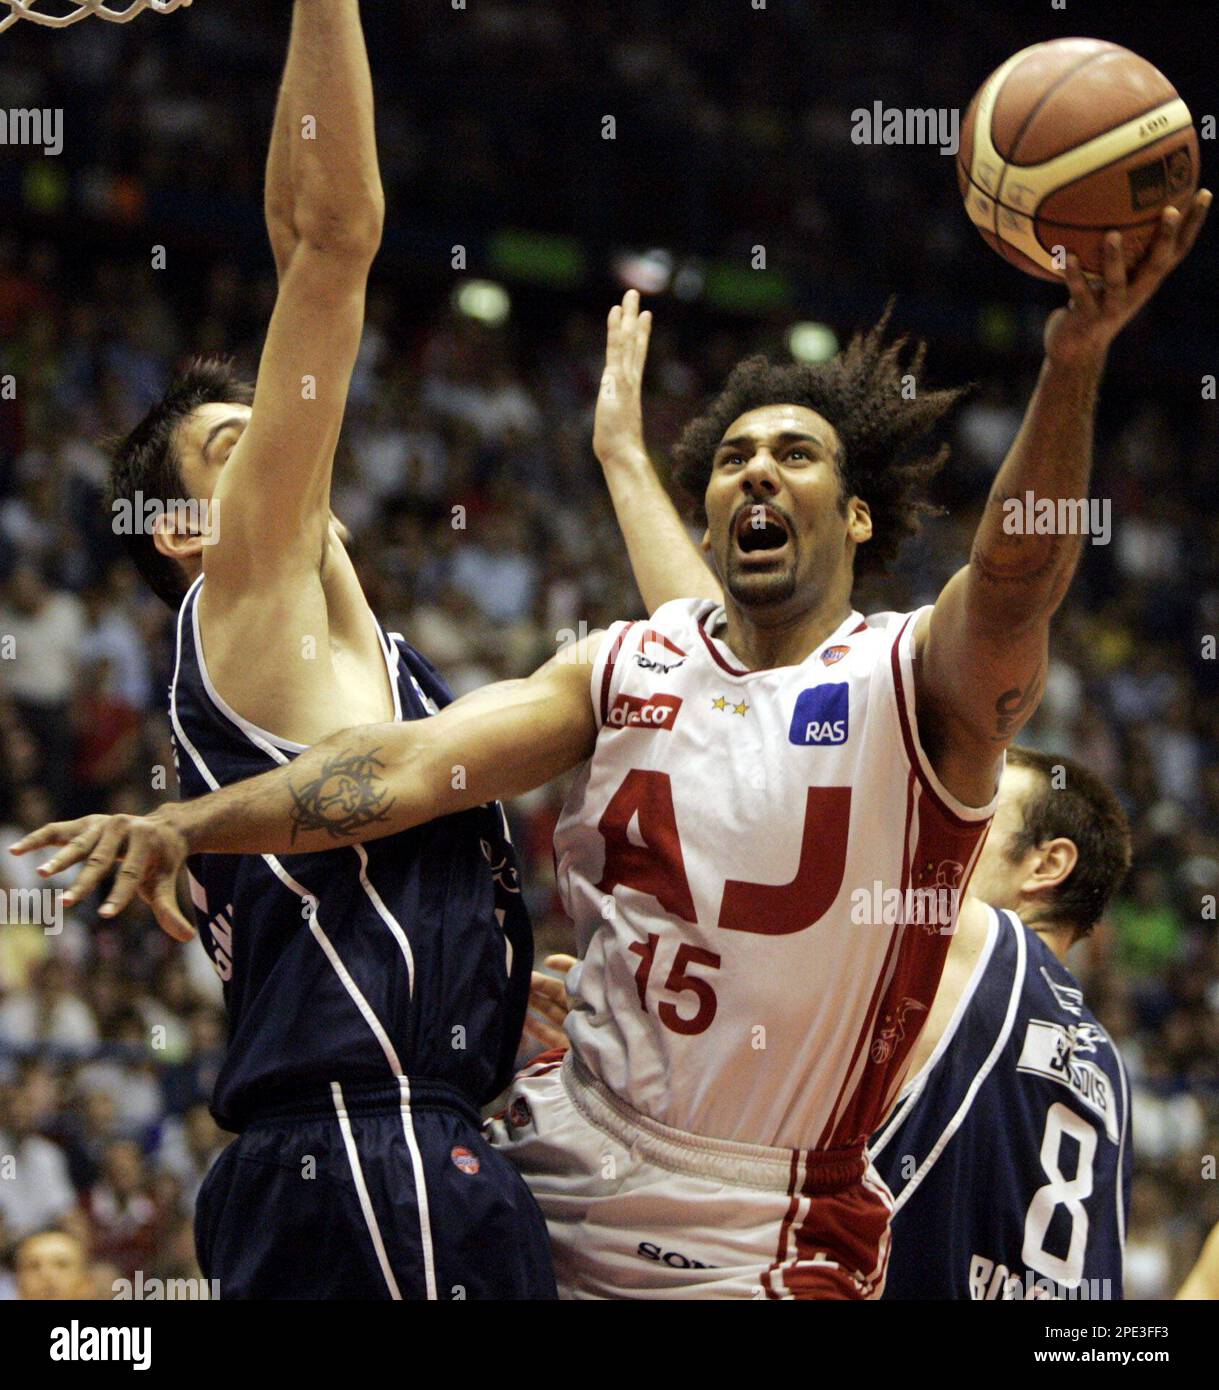 Armani Jeans Joseph Blair of U.S, right, attempts a basket as Climamio  Bologna's Erazem Lorbek of Slovenia tries to stop him during their final 4  Italian League basketball match in Milan, Italy,